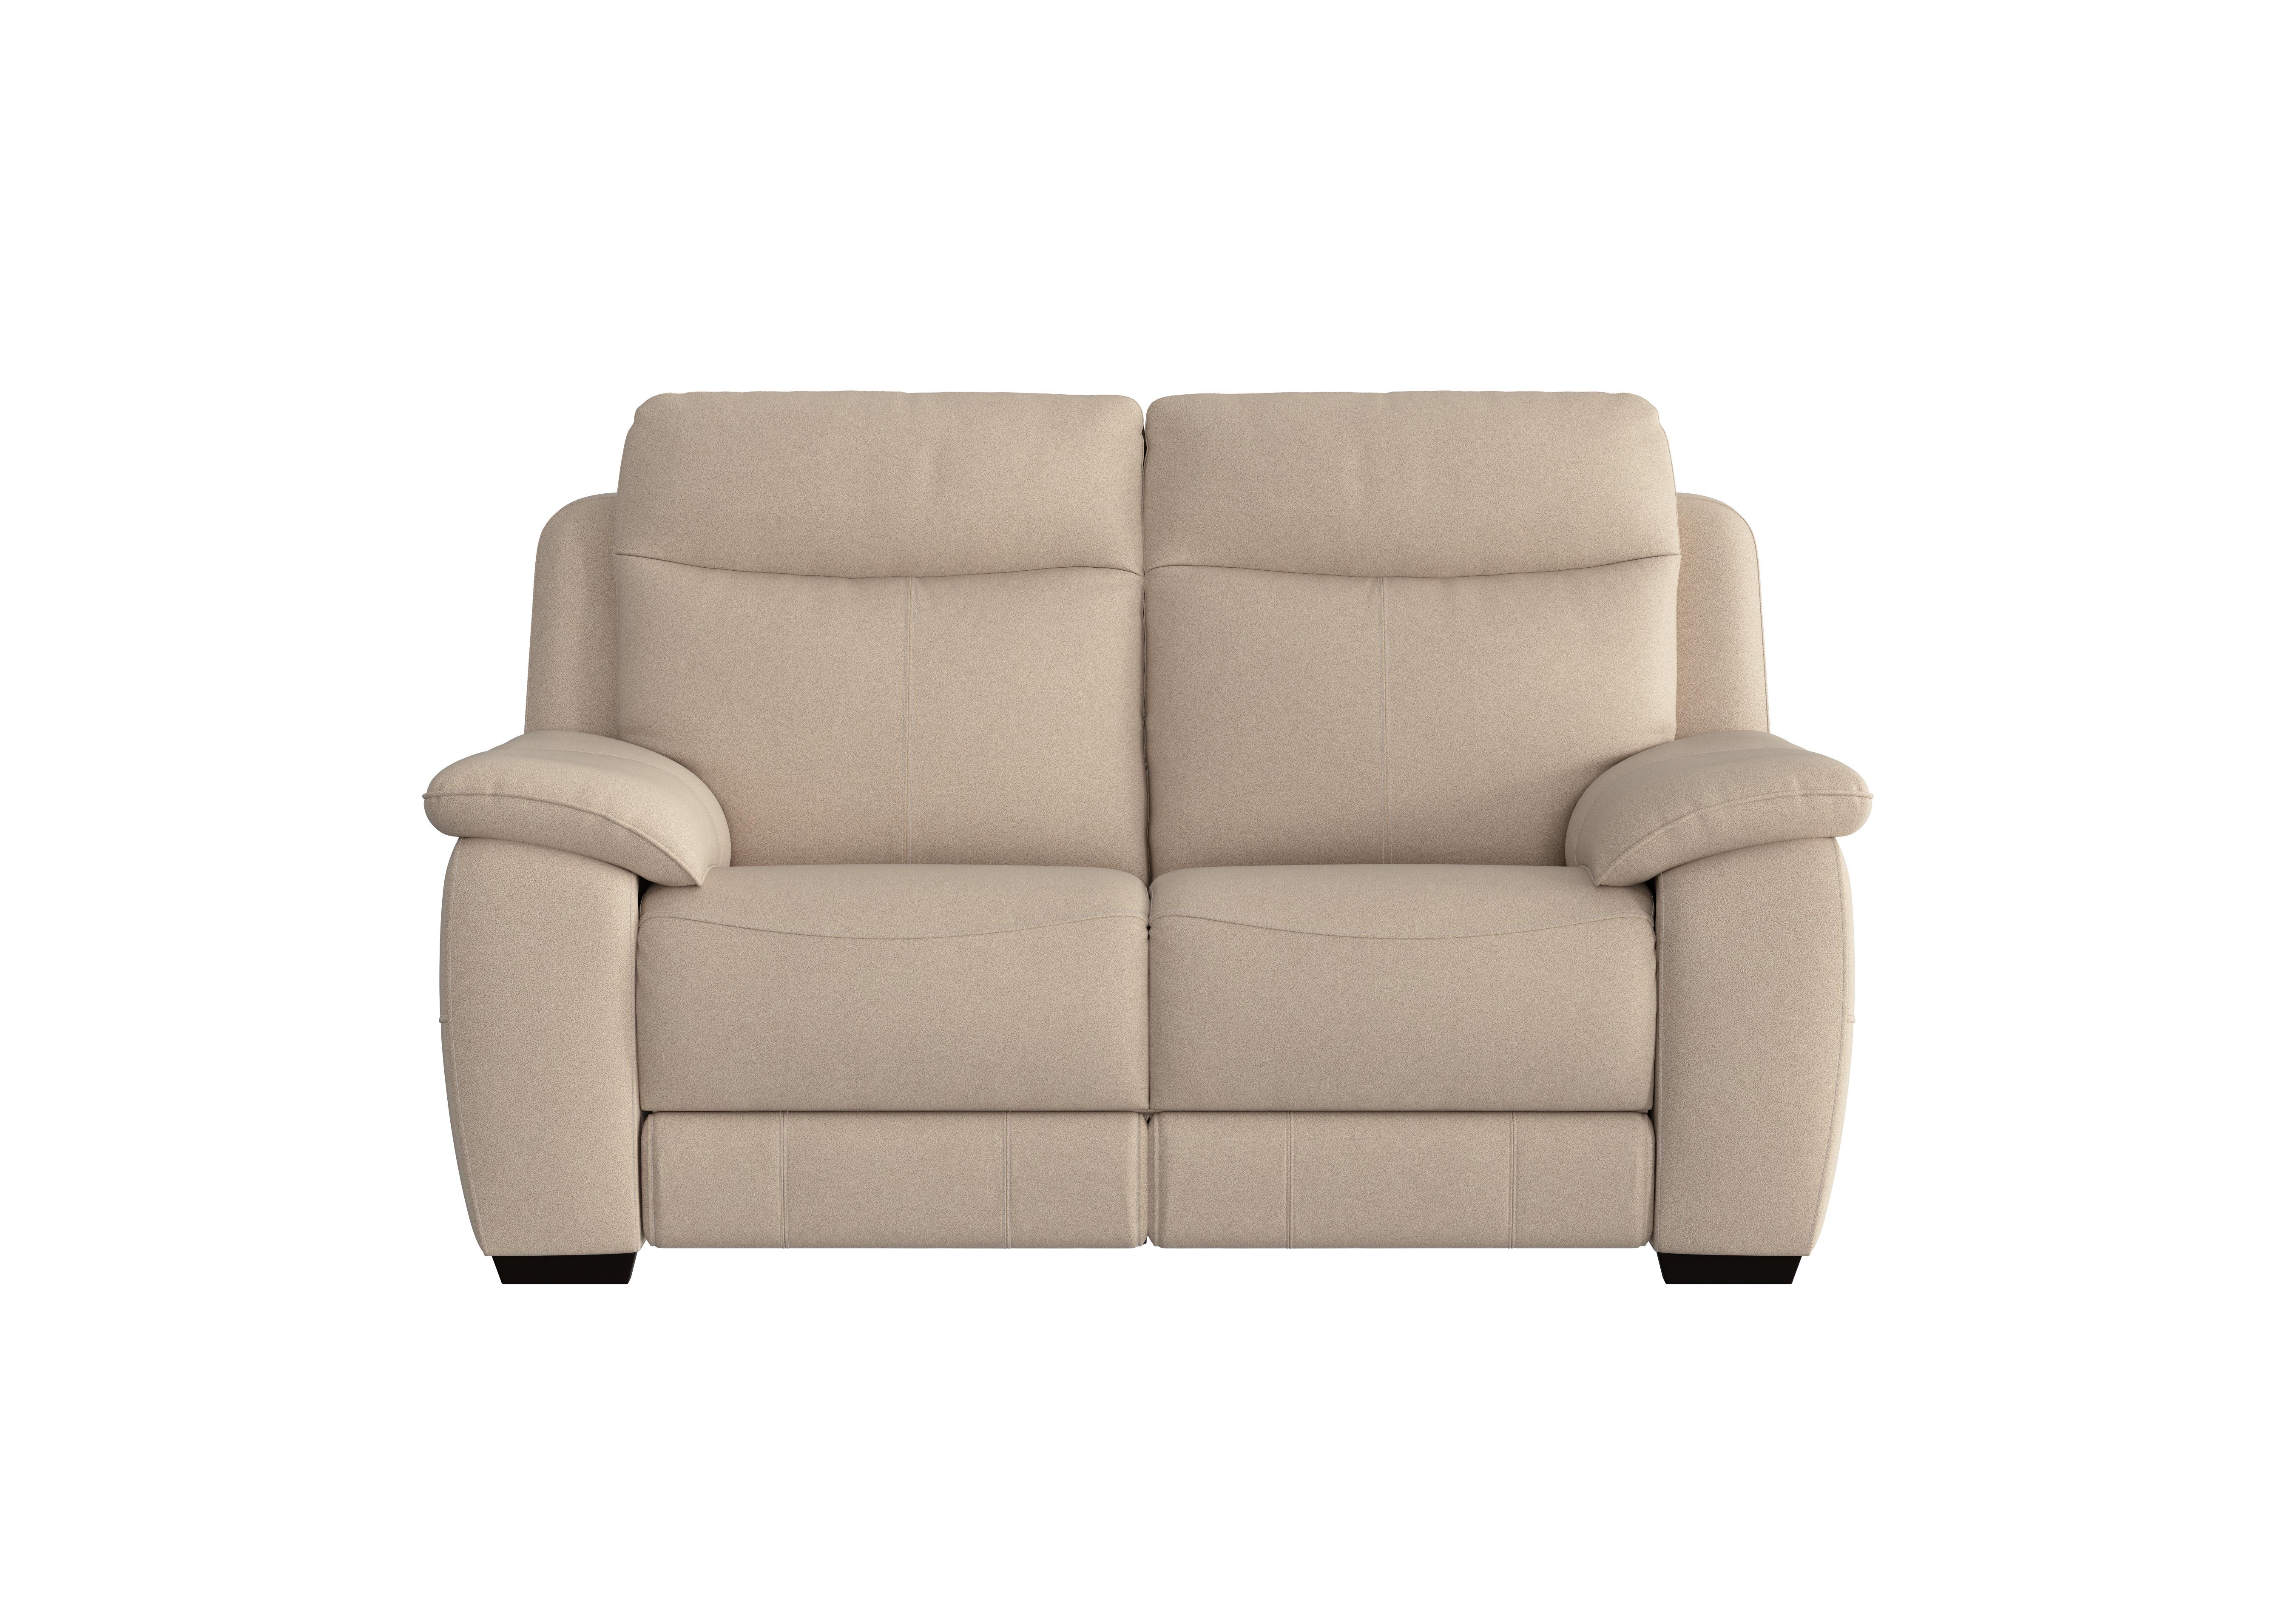 Starlight Express 2 Seater Fabric Recliner Sofa with Power Headrests in Bfa-Blj-R20 Bisque on Furniture Village